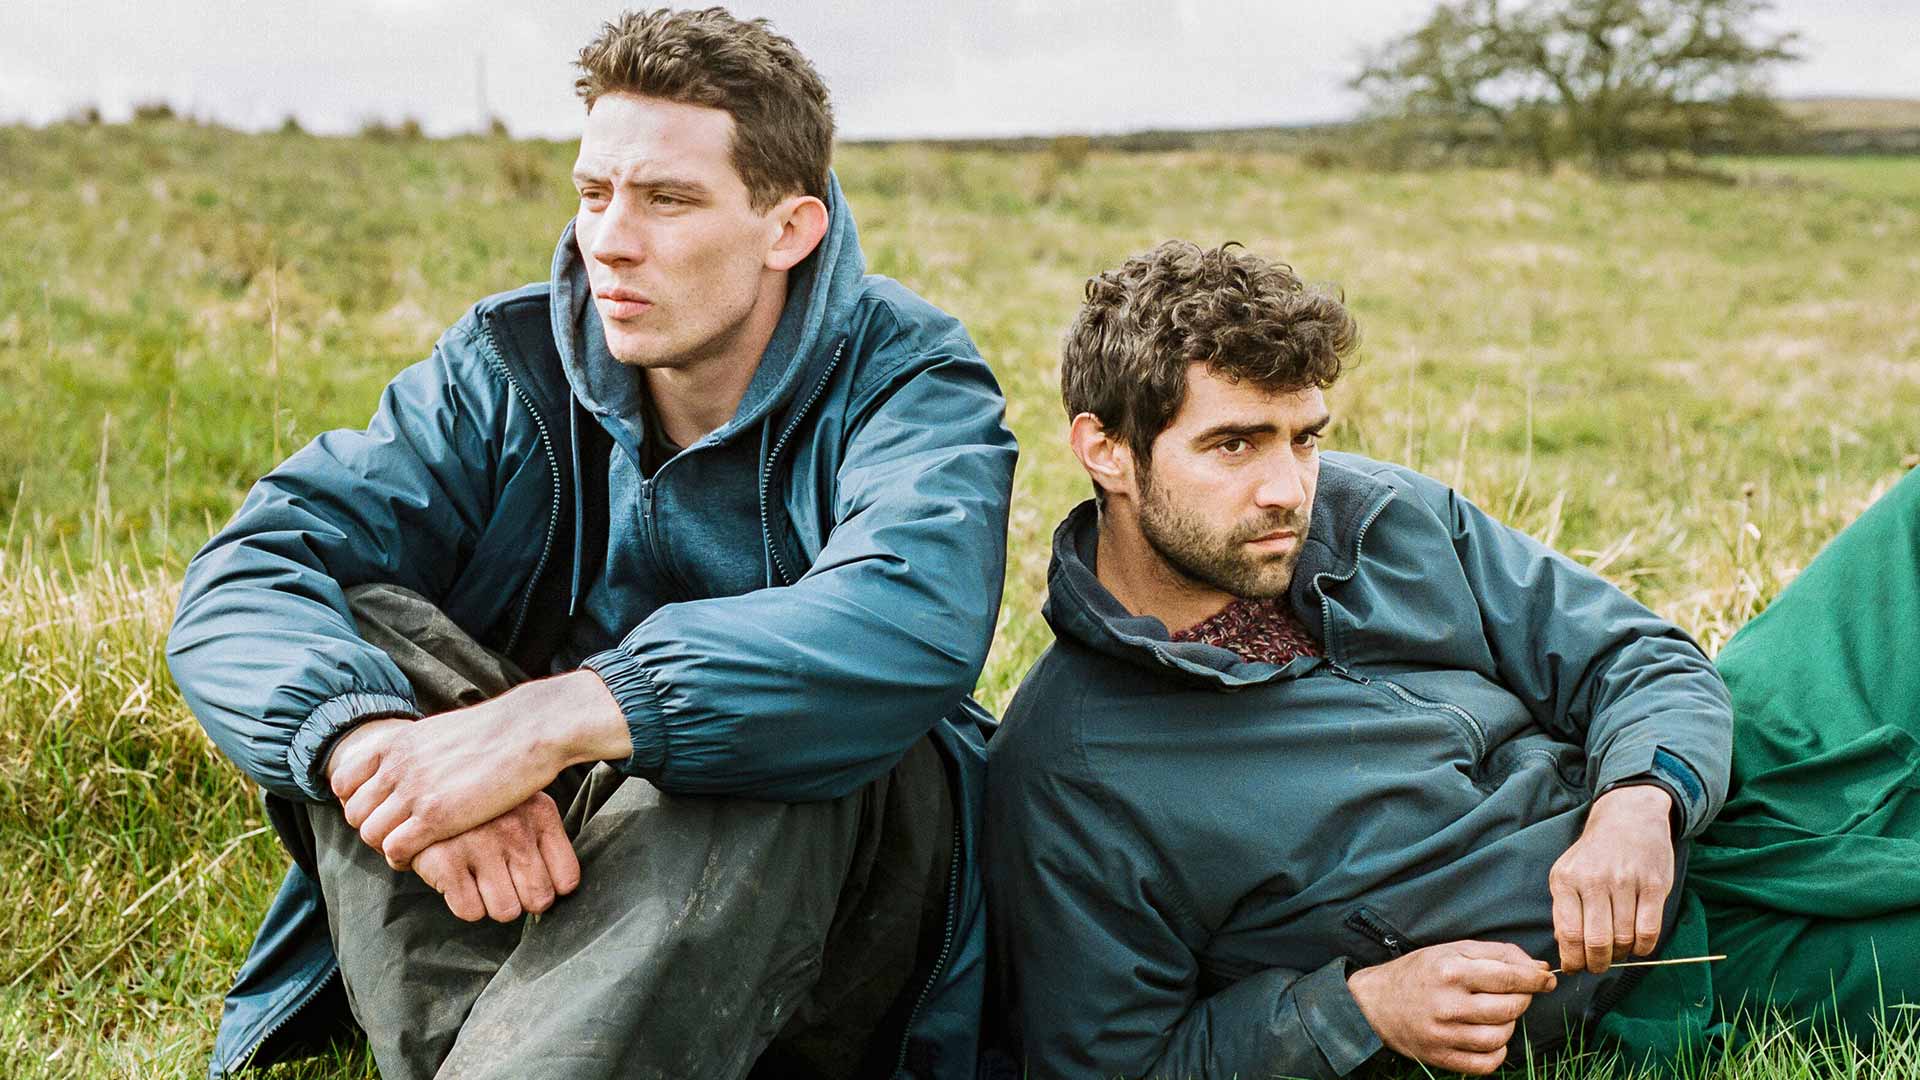 Promotional still from God's Own Country